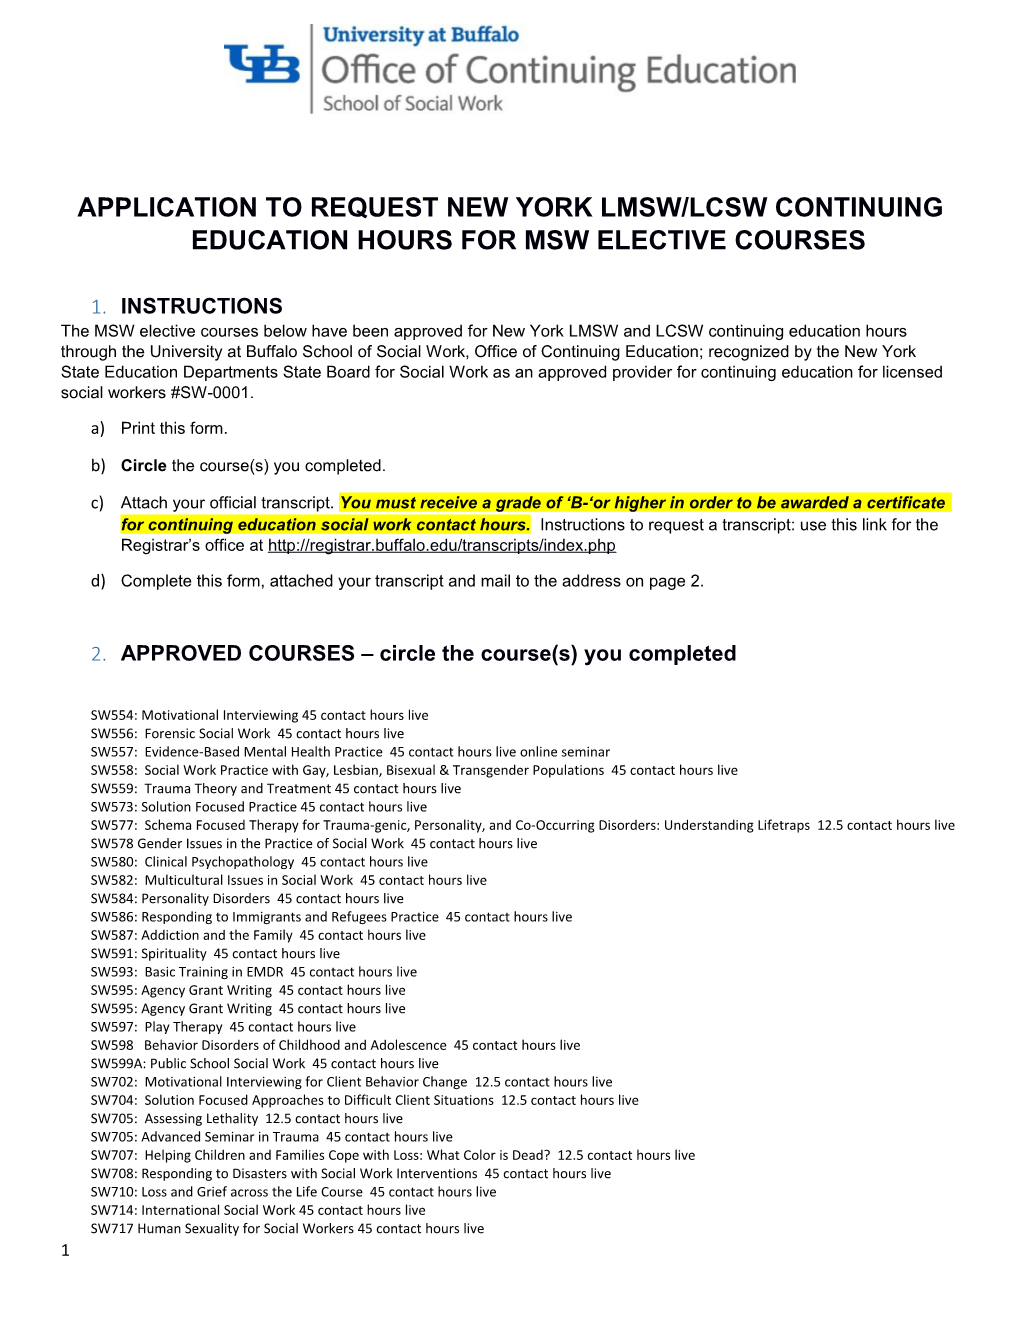 Application to Request New York Lmsw/Lcsw Continuing Education Hours for Msw Elective Courses